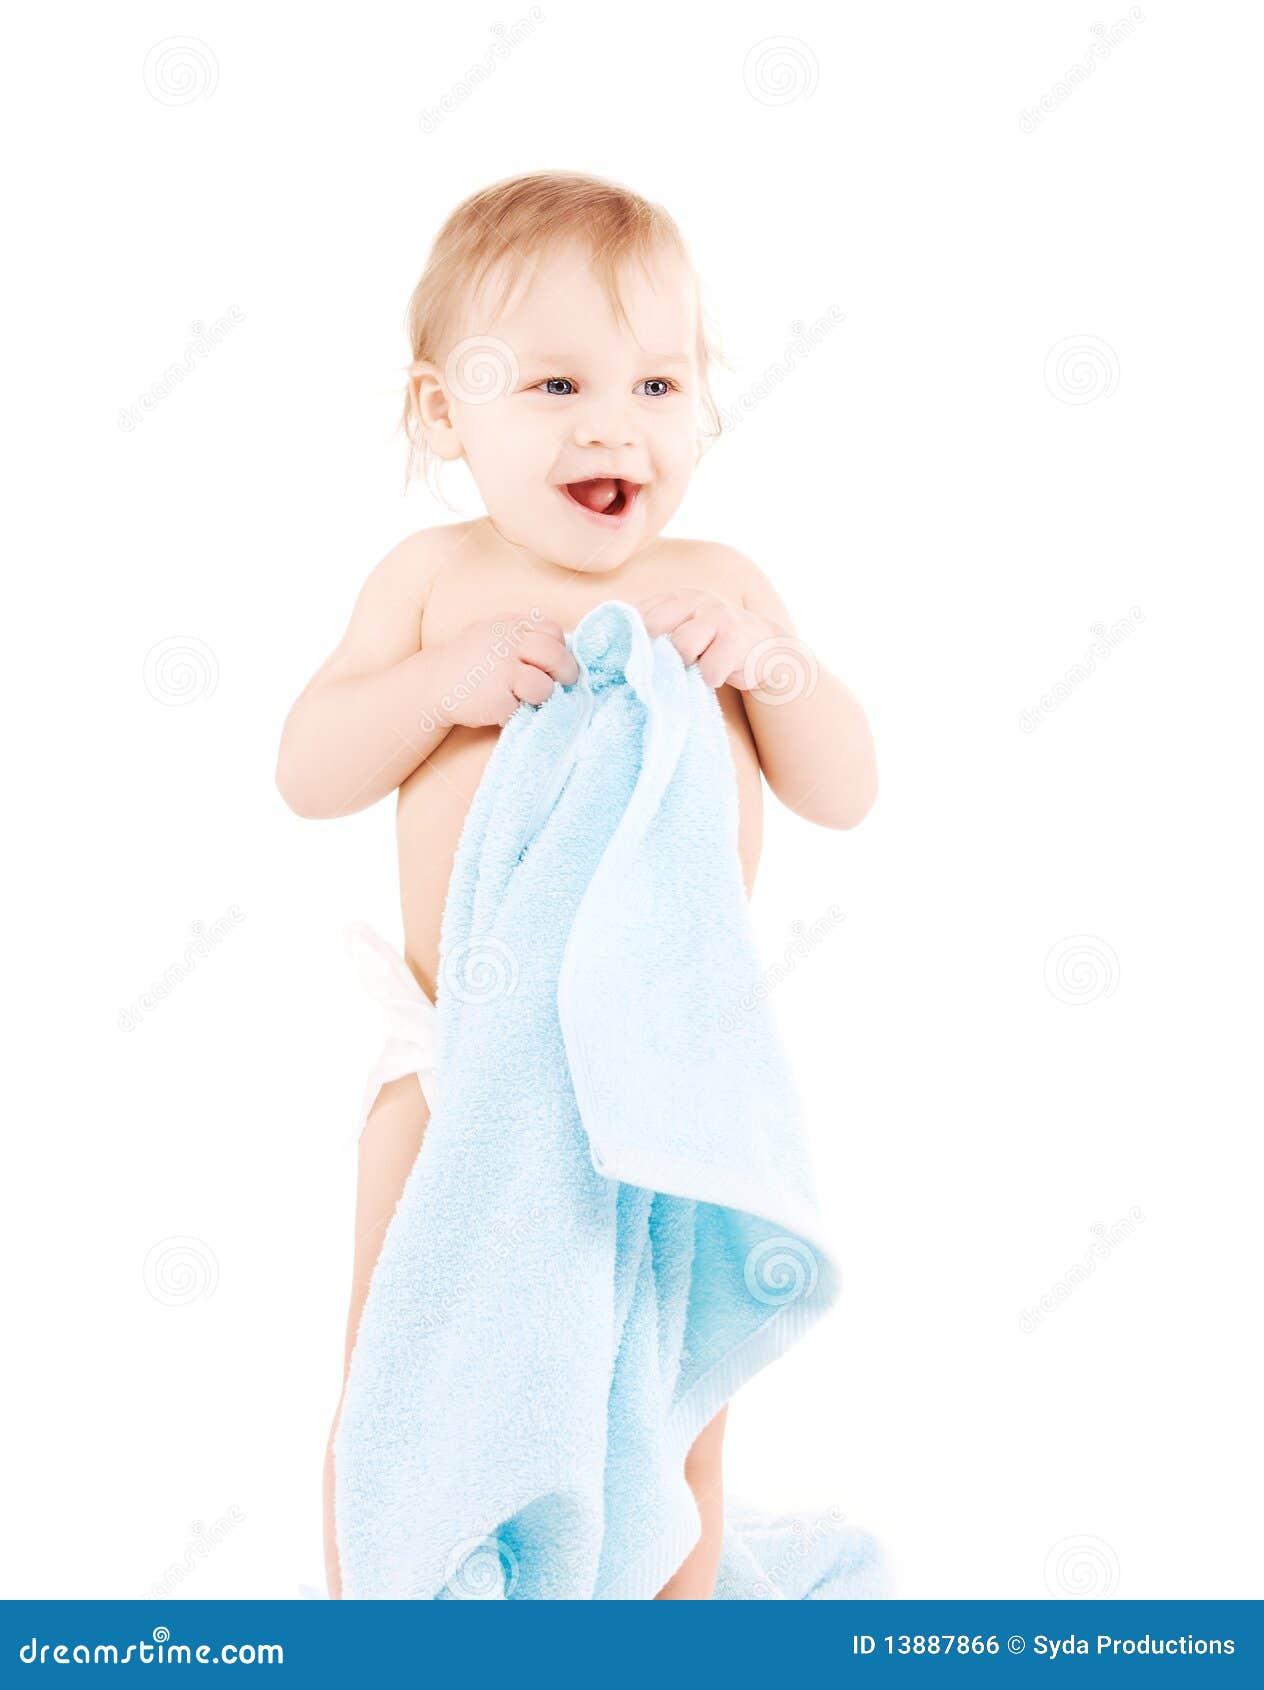 Baby with blue towel stock photo. Image of life, infant - 13887866